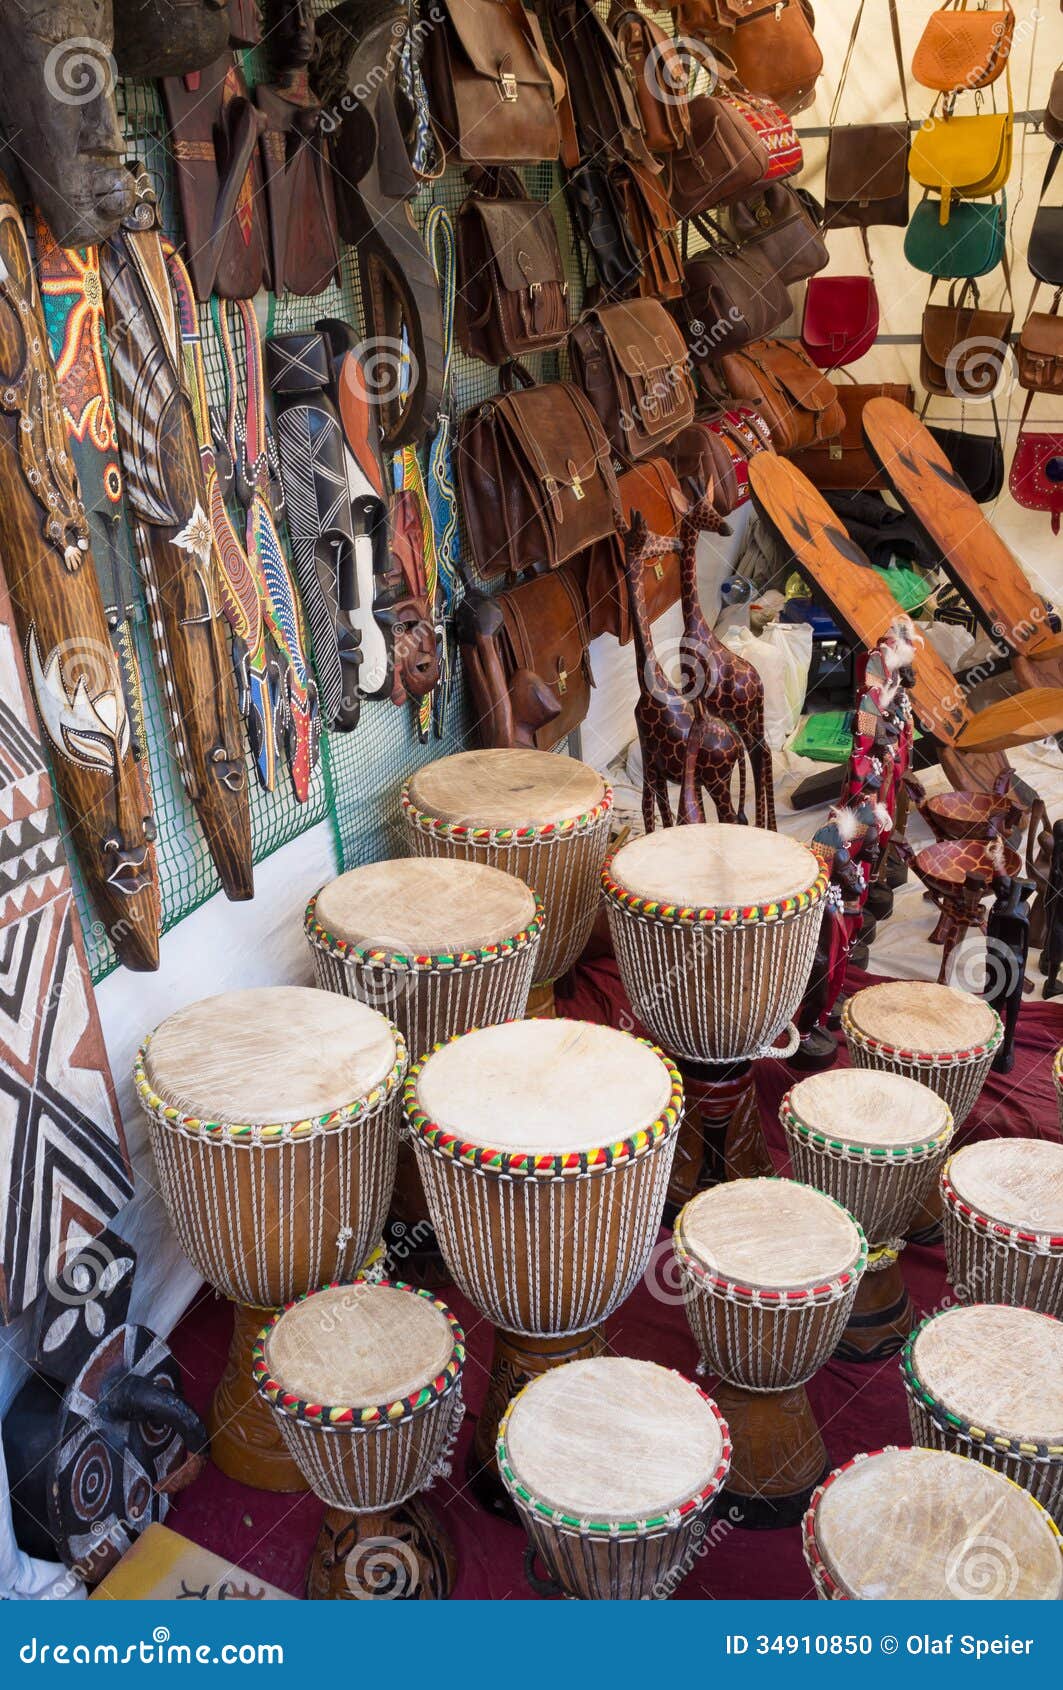 African crafts stock photo. Image of crafts, handmade - 34910850